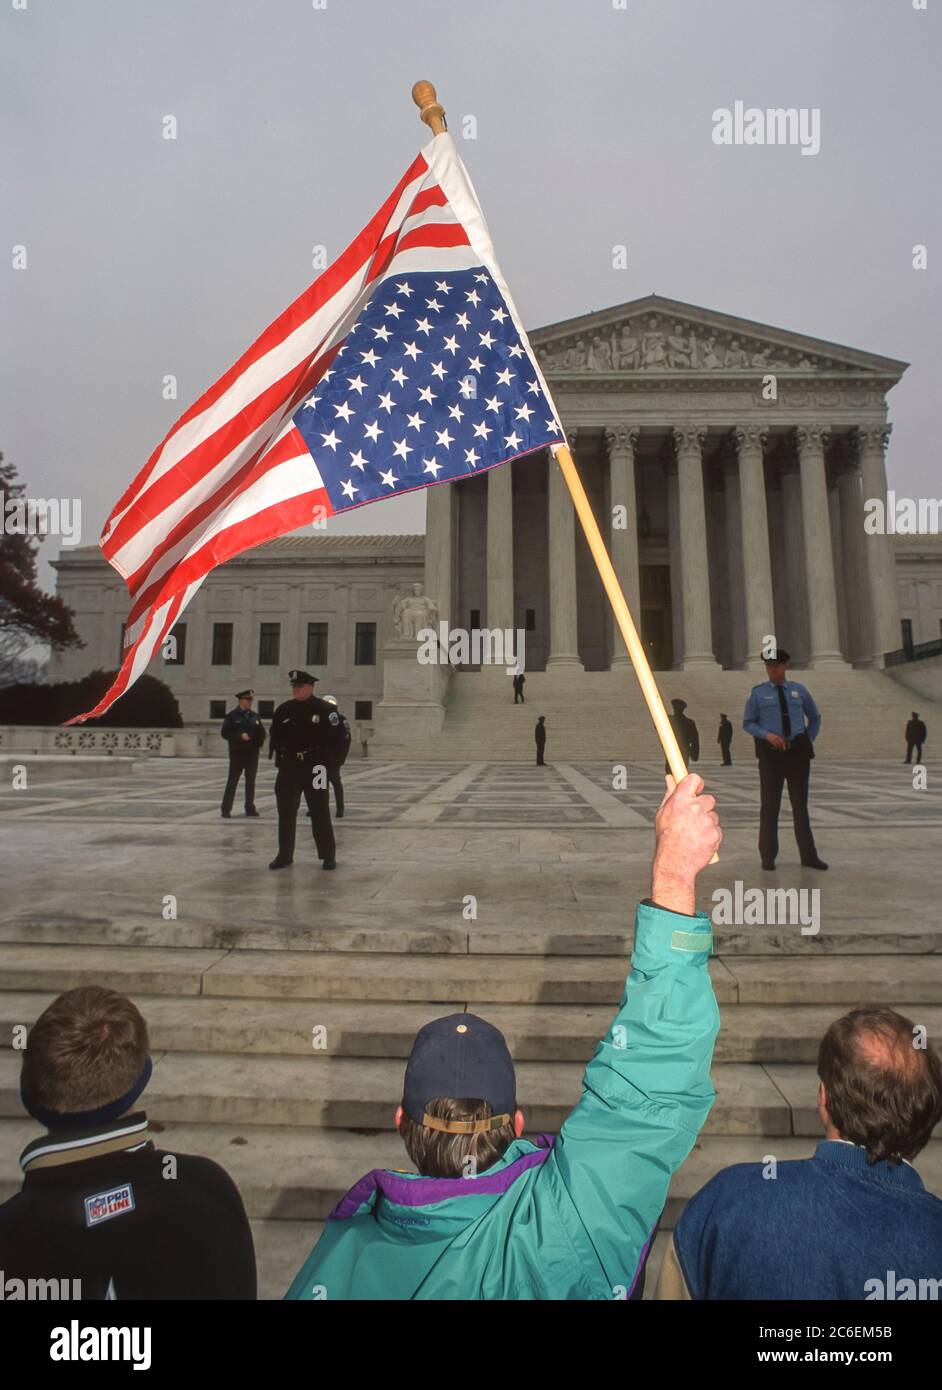 WASHINGTON, DC, USA, DECEMBER 11, 2000 - Protest of presidential election dispute in front of U. S. Supreme Court building. Stock Photo